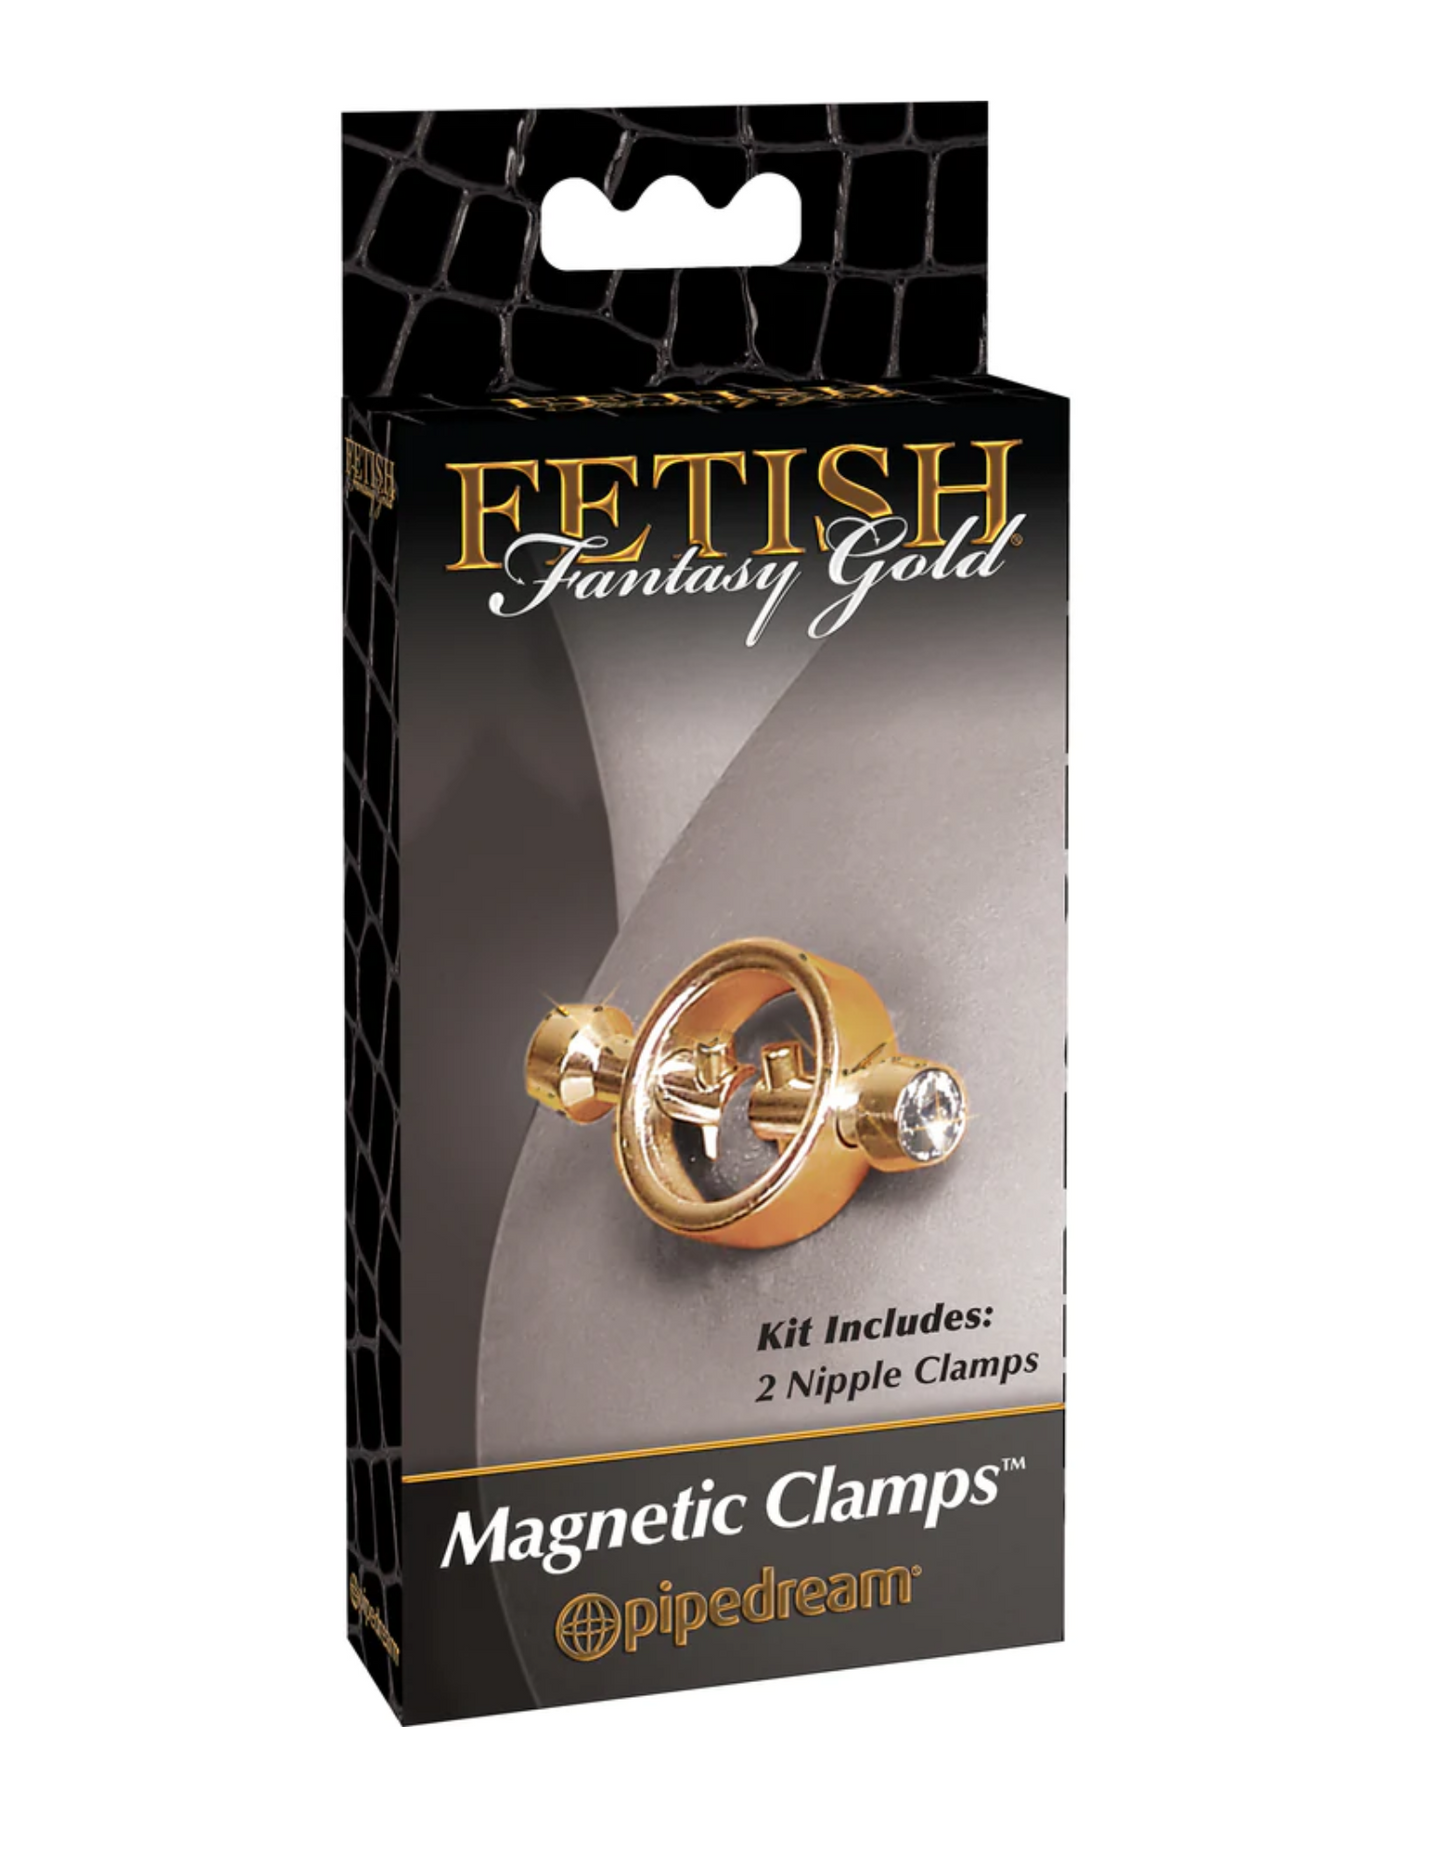 Photo shows the front of the box for the Fetish Fantasy Gold Magnetic Nipple Clamps from Pipedreams.